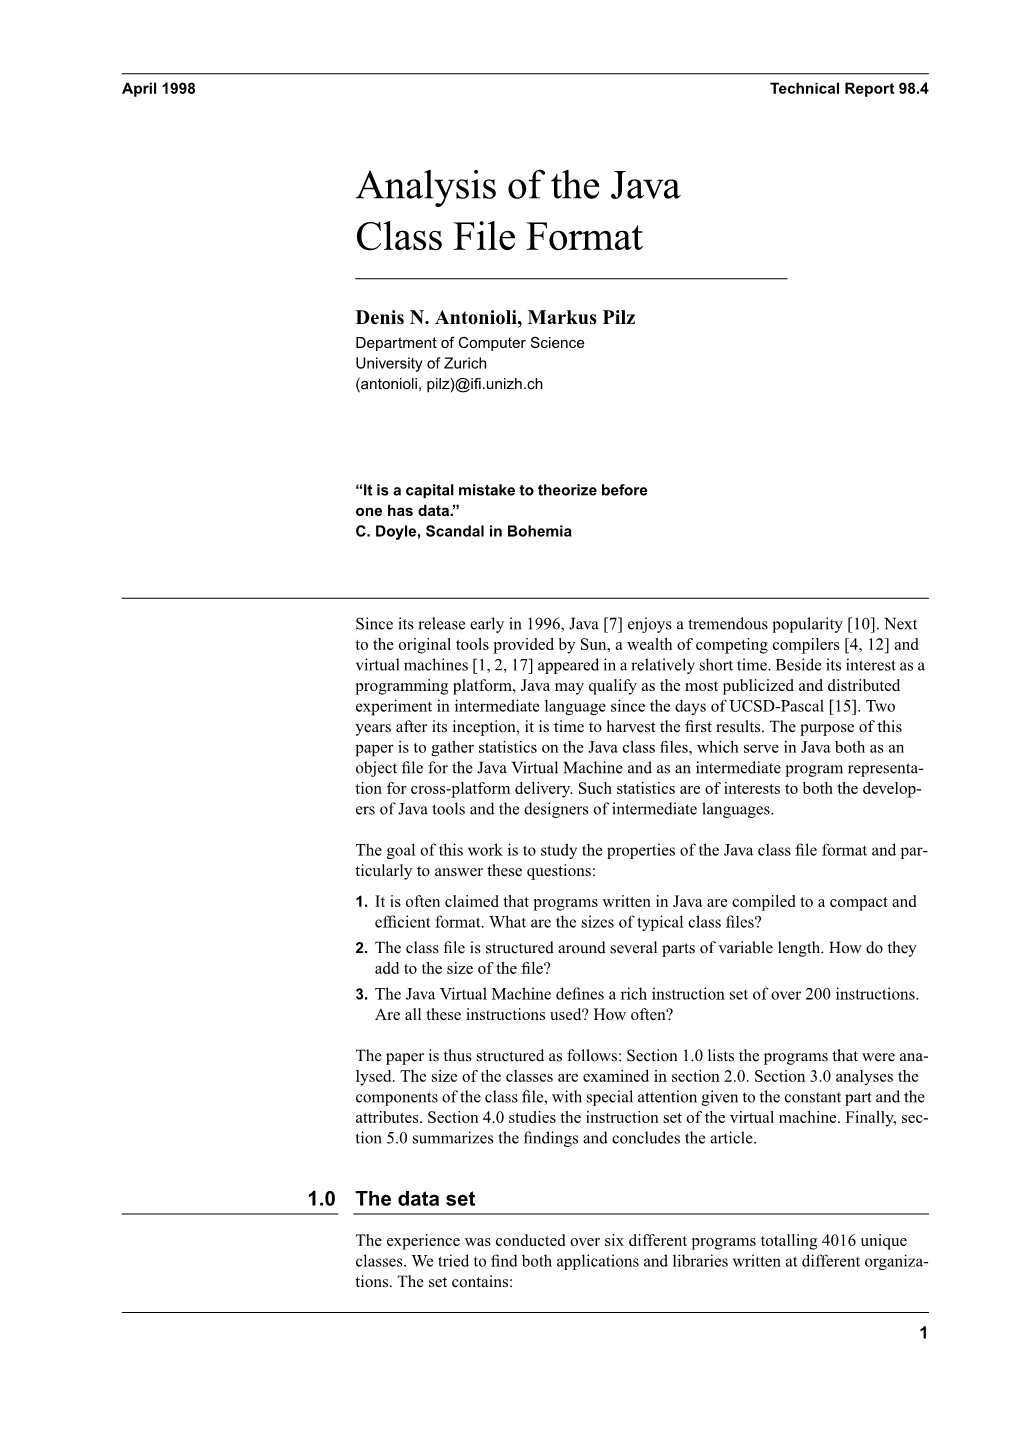 Analysis of the Java Class File Format